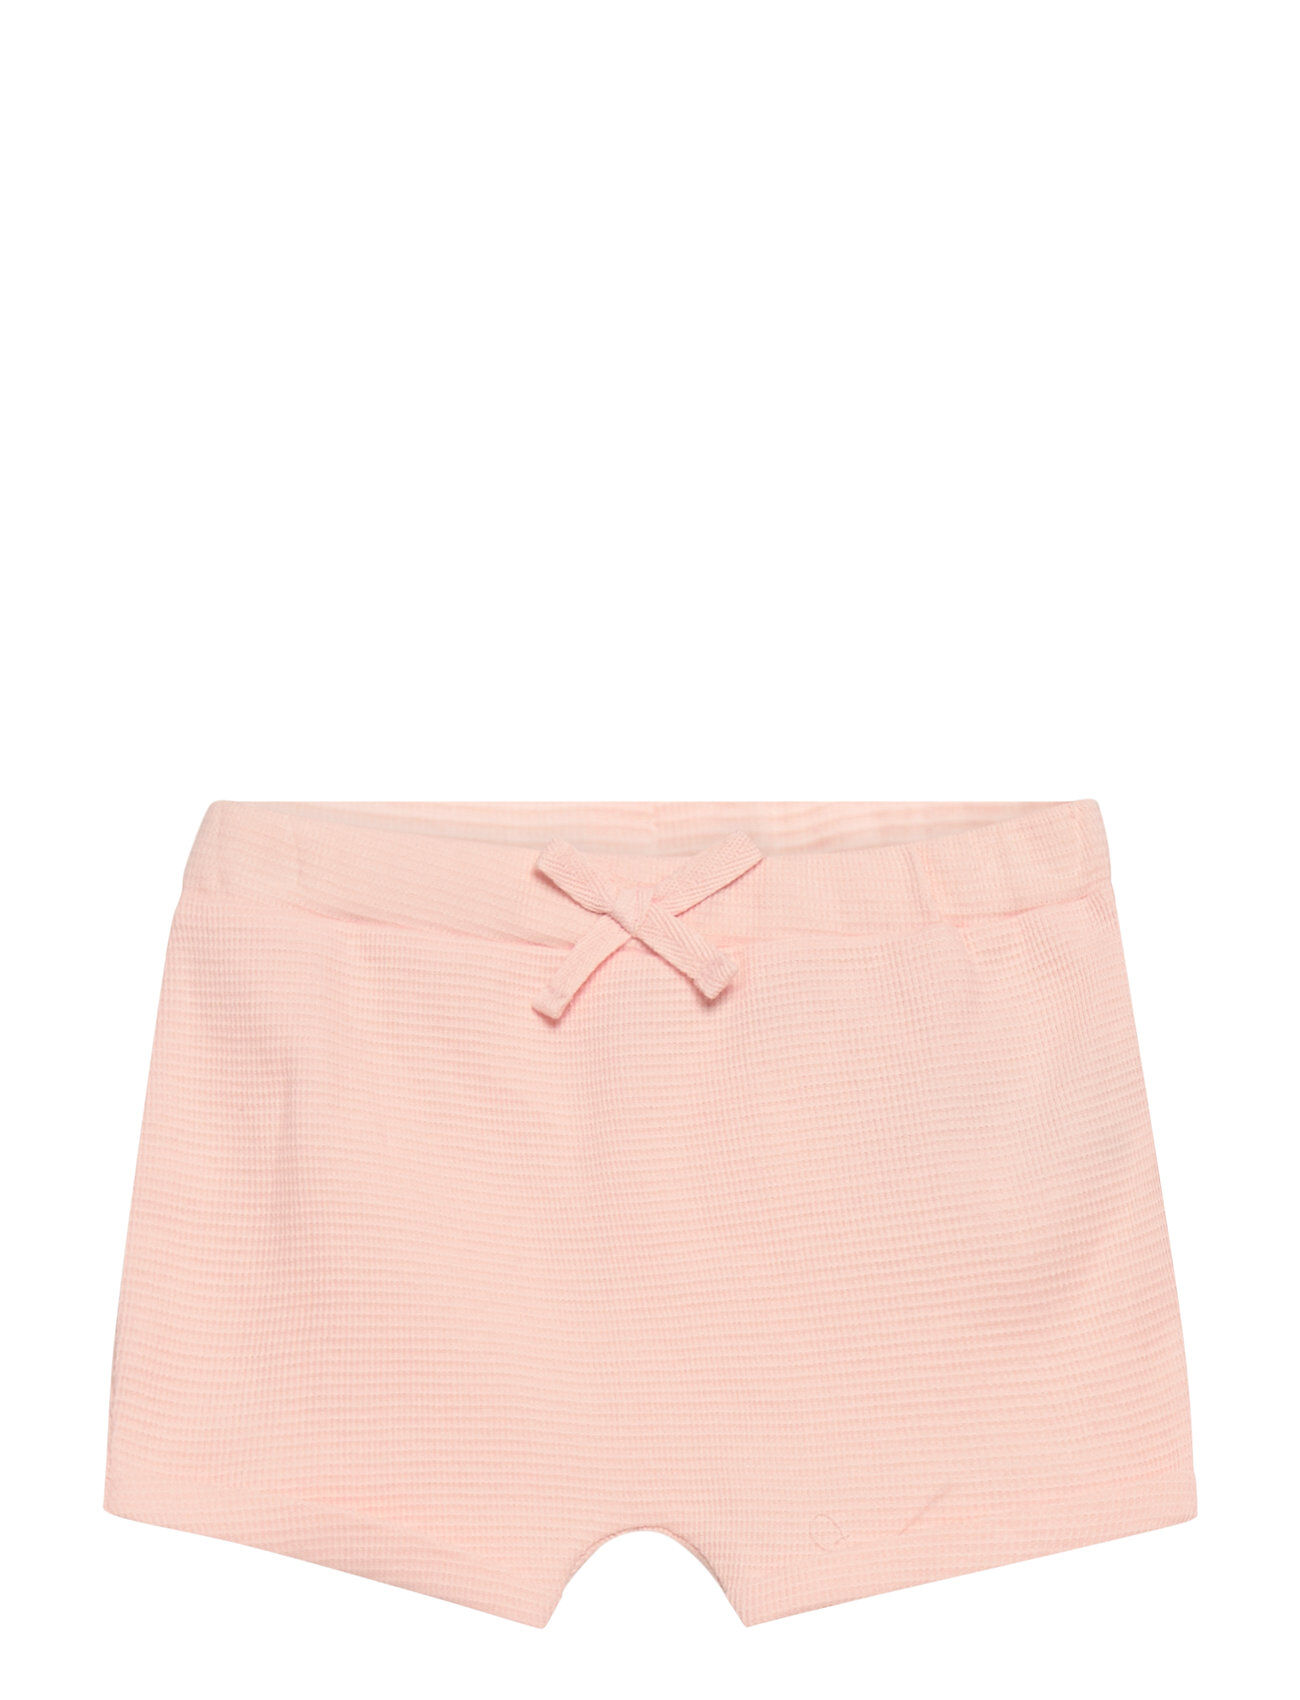 Hust & Claire Heja - Shorts Shorts Bloomers Rosa Hust & Claire